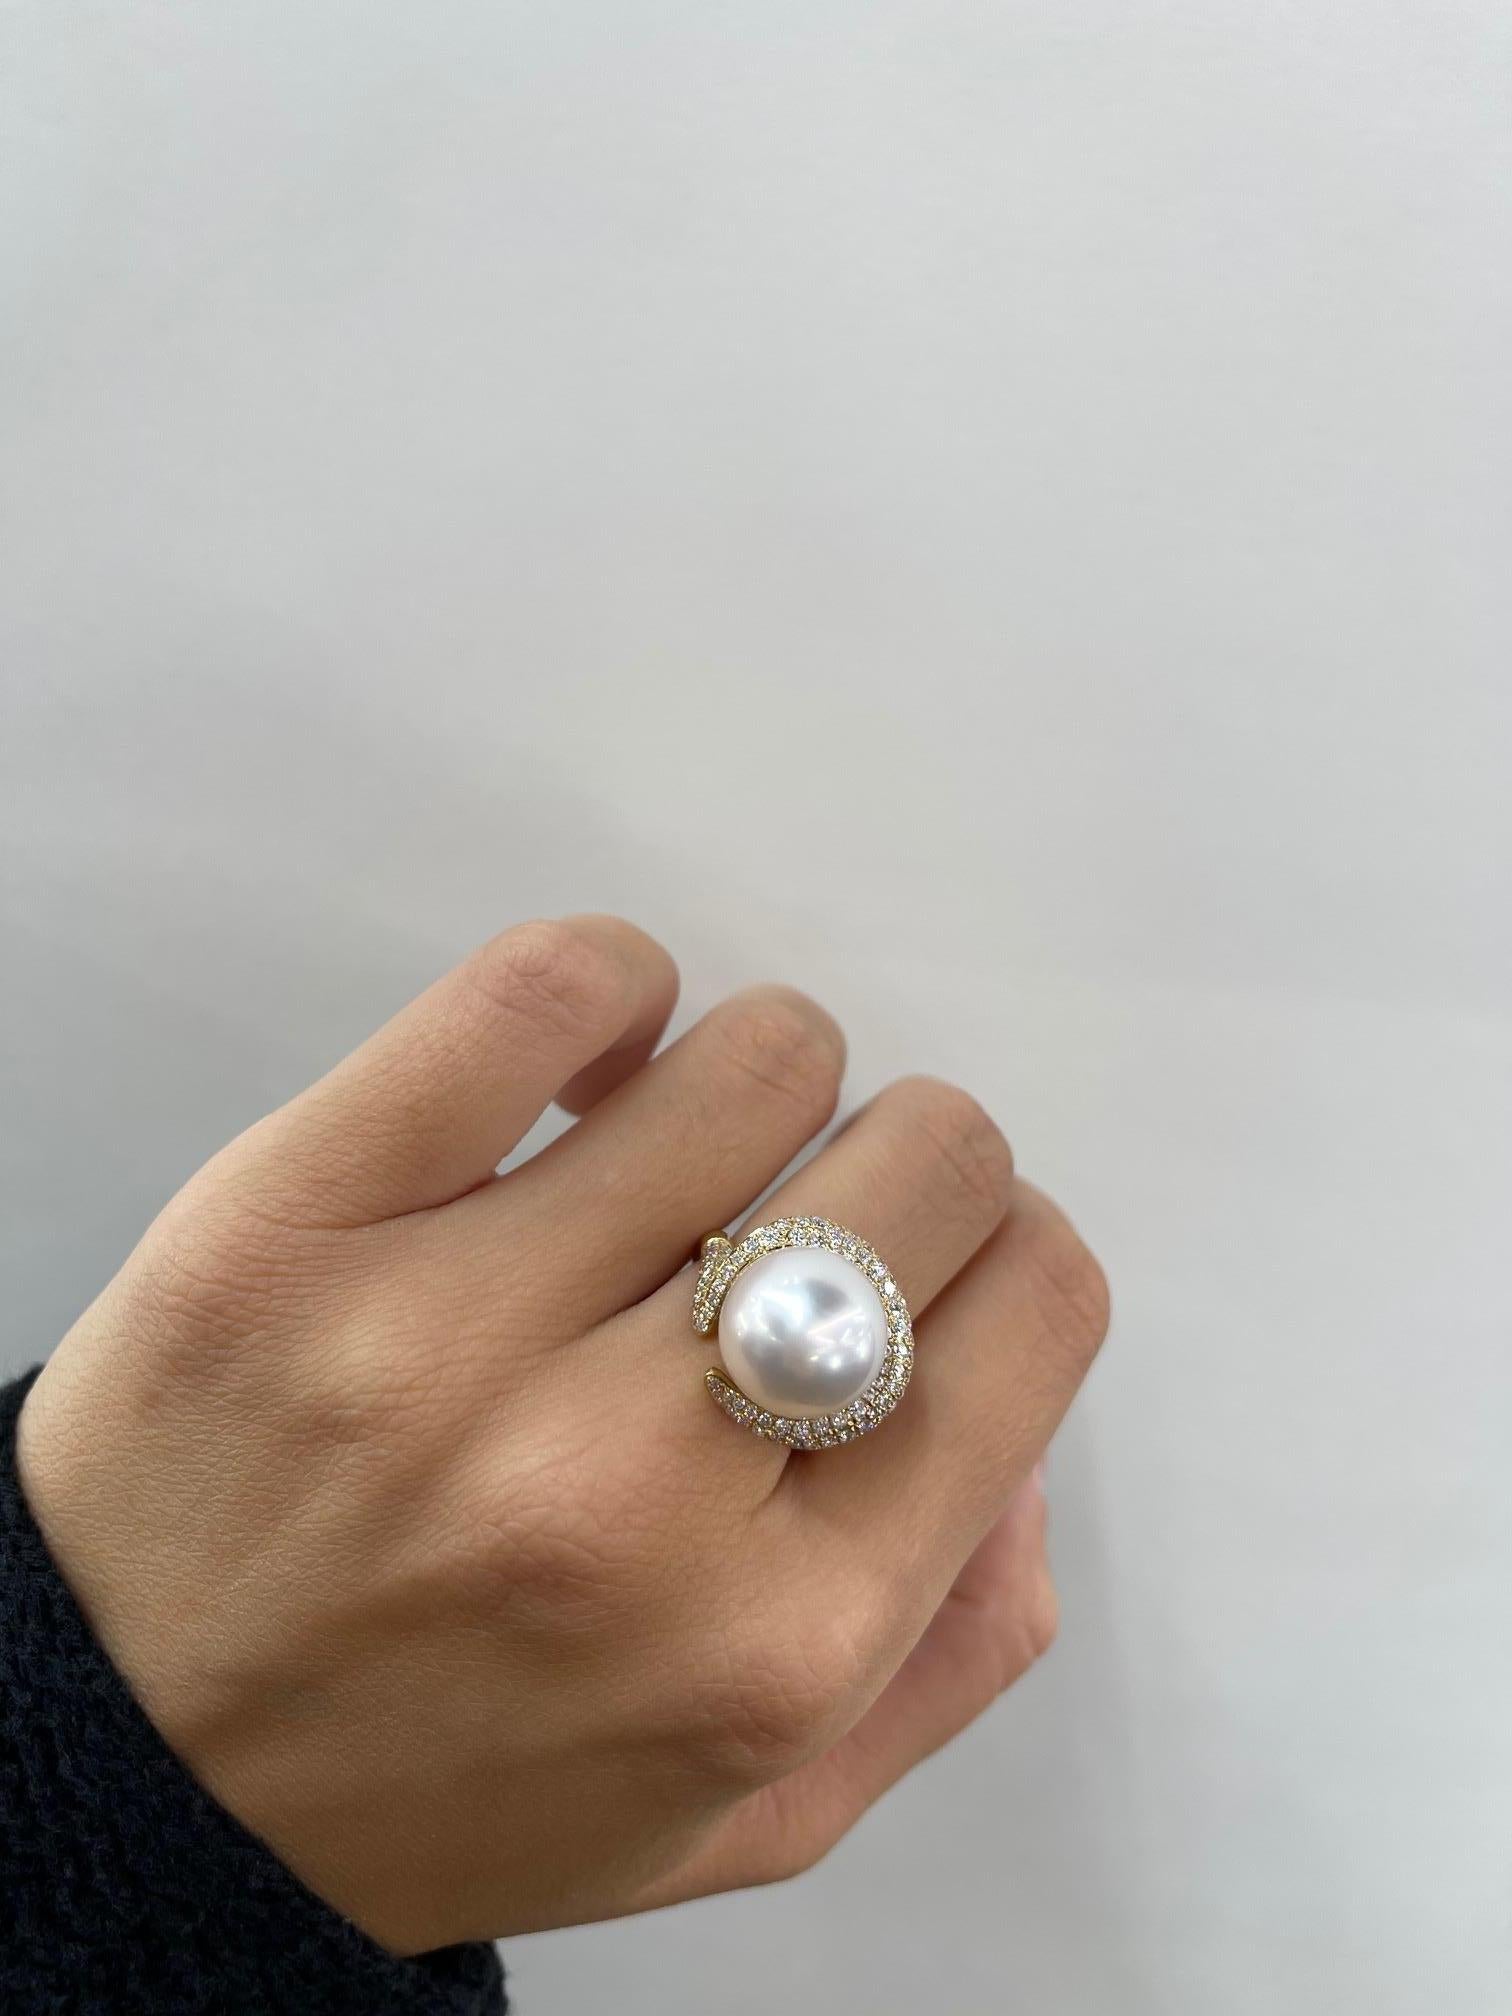 South Sea Pearl Diamond Cocktail Ring 0.84 Carats 4.9 Grams For Sale 2